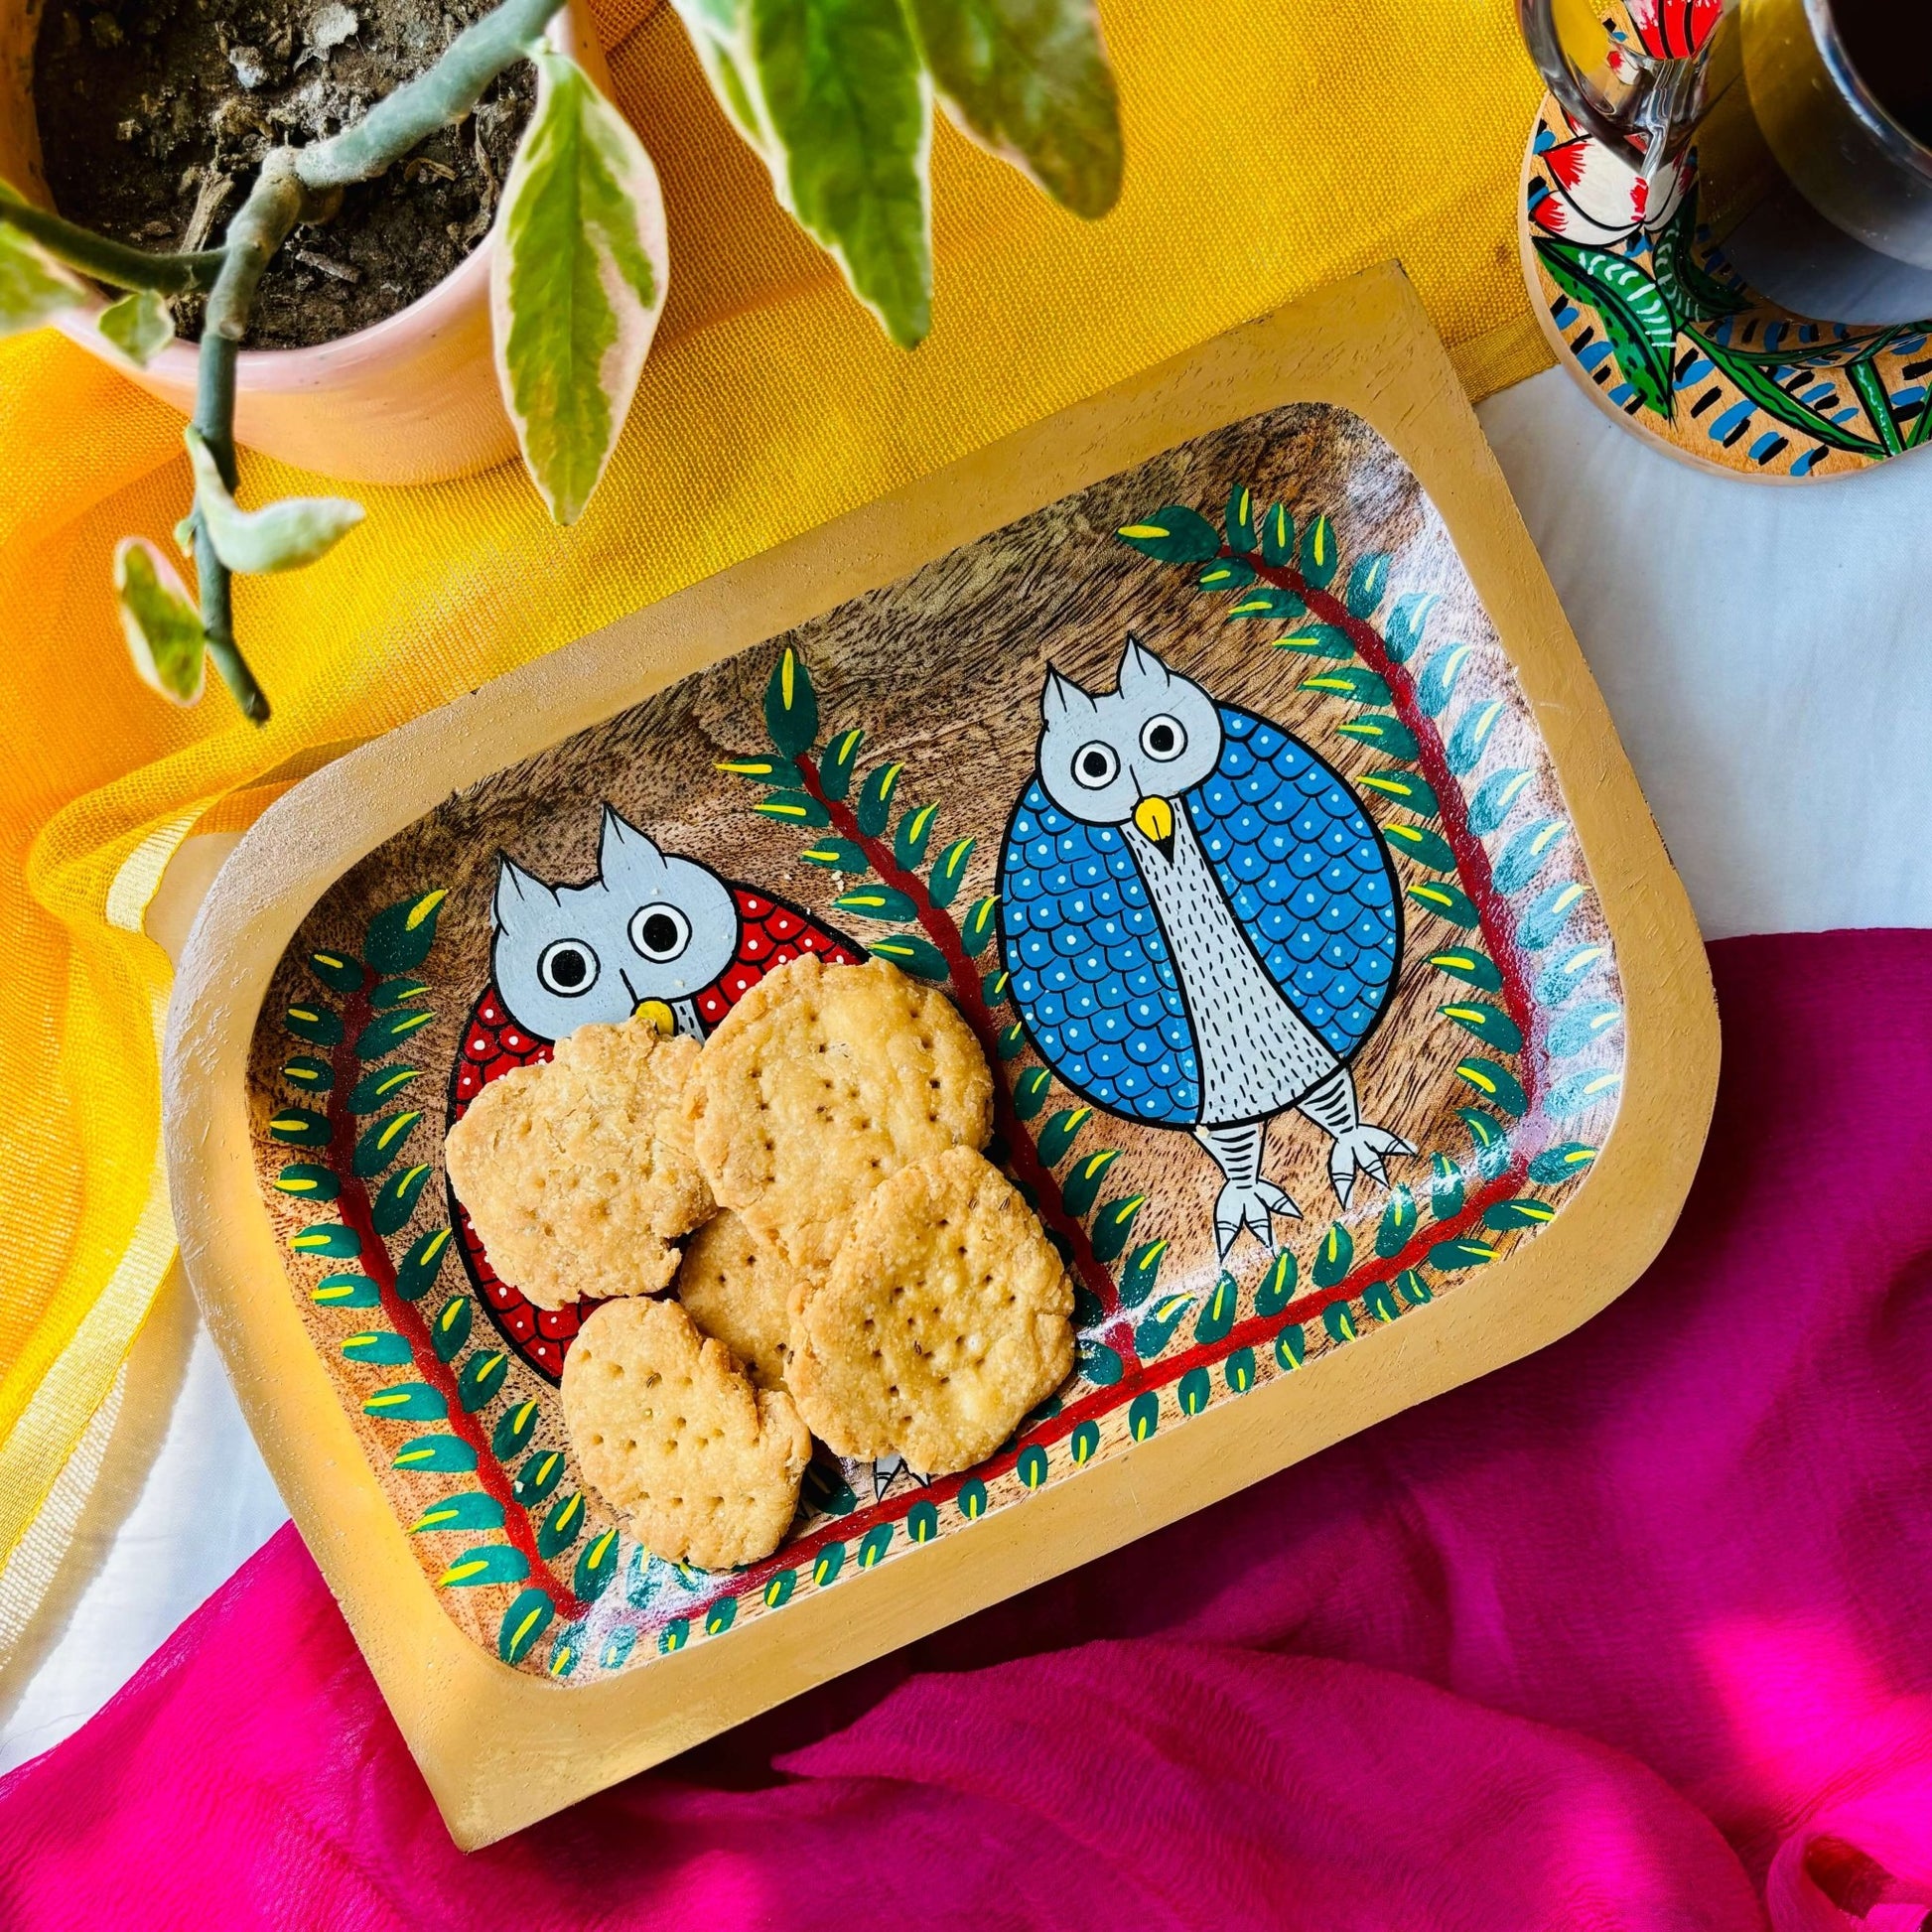 Snacks served in a handcrafted pure mango wood rectangular wood platter, painted with two owl motifs by generational Pattachitra artists